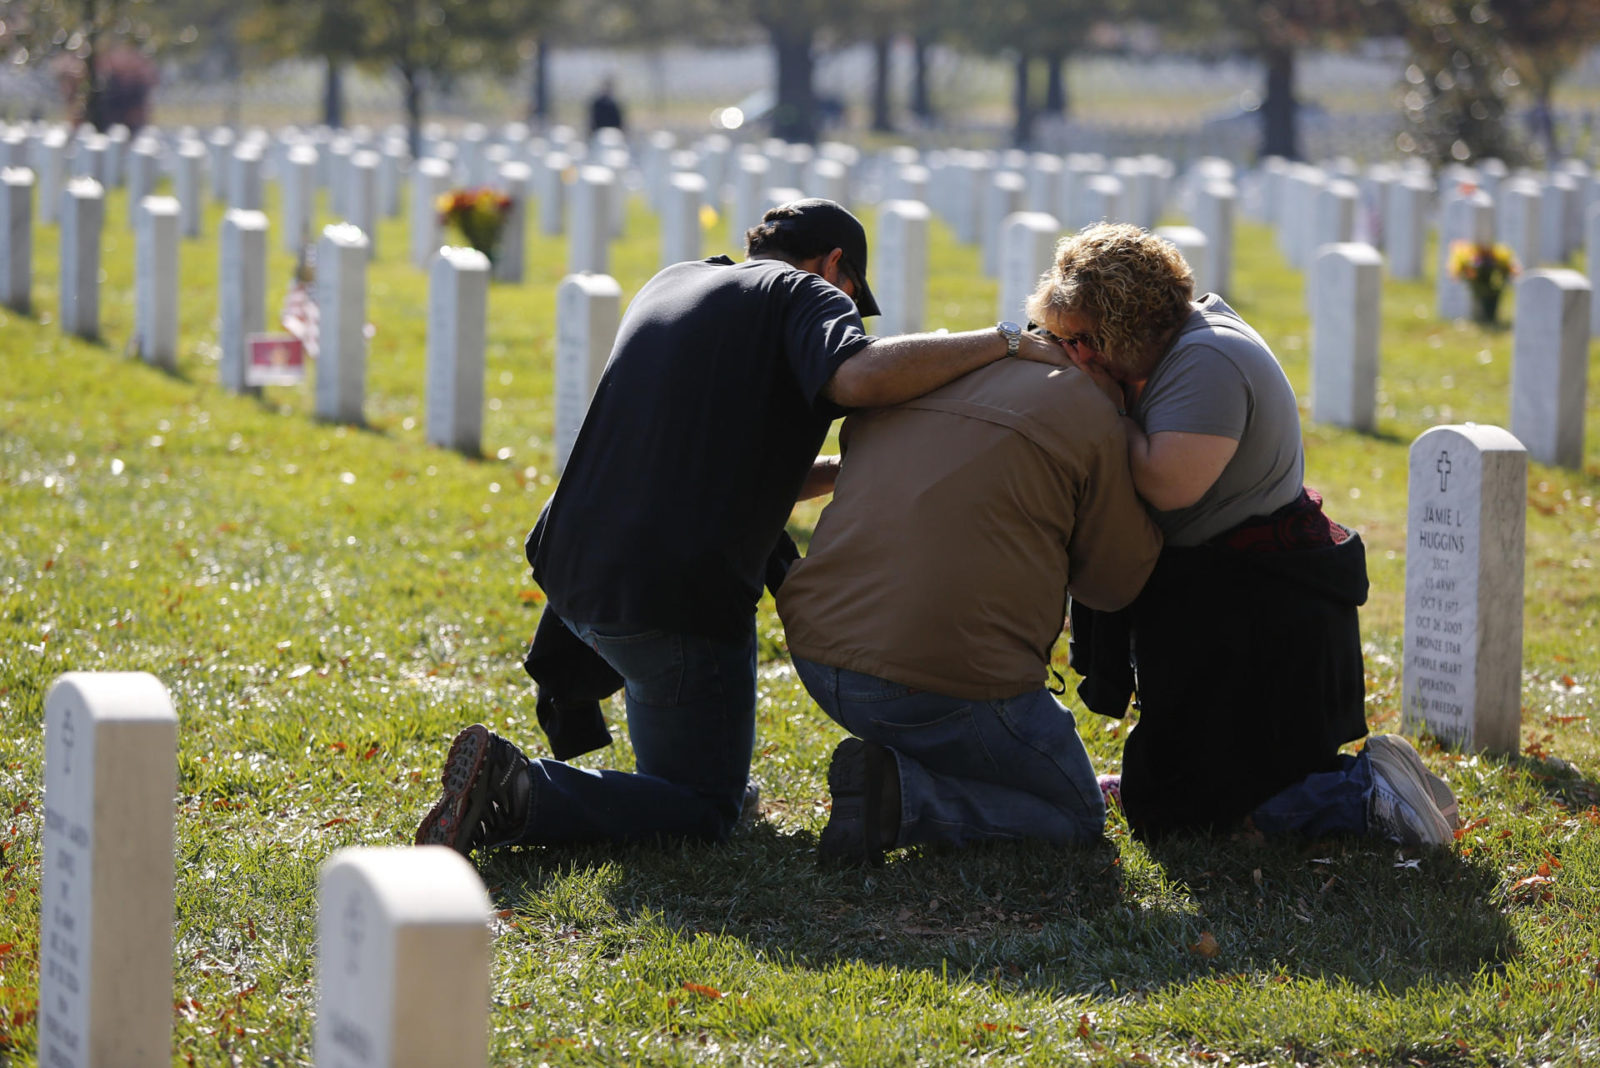 People grieve at a gravesite in Section 60, an area where members of the U.S. military who were killed in action in Iraq and Afghanistan are buried, during Veterans Day observances at Arlington National Cemetery in Arlington, Virginia, November 11, 2012. REUTERS/Jonathan Ernst (UNITED STATES - Tags: POLITICS MILITARY)